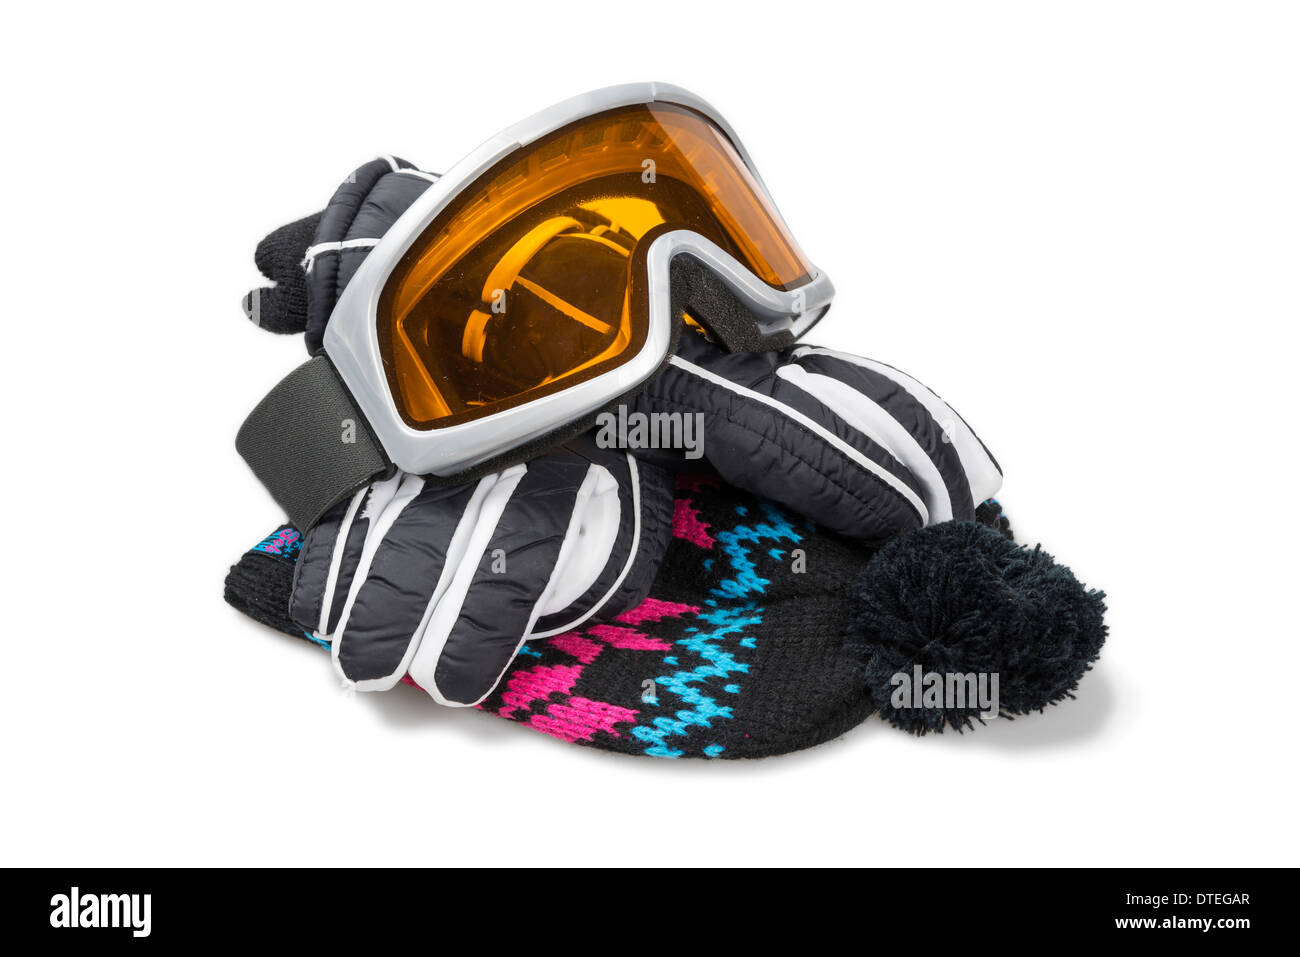 Ski gloves, cap and goggles isolated over white with clipping path. Stock Photo